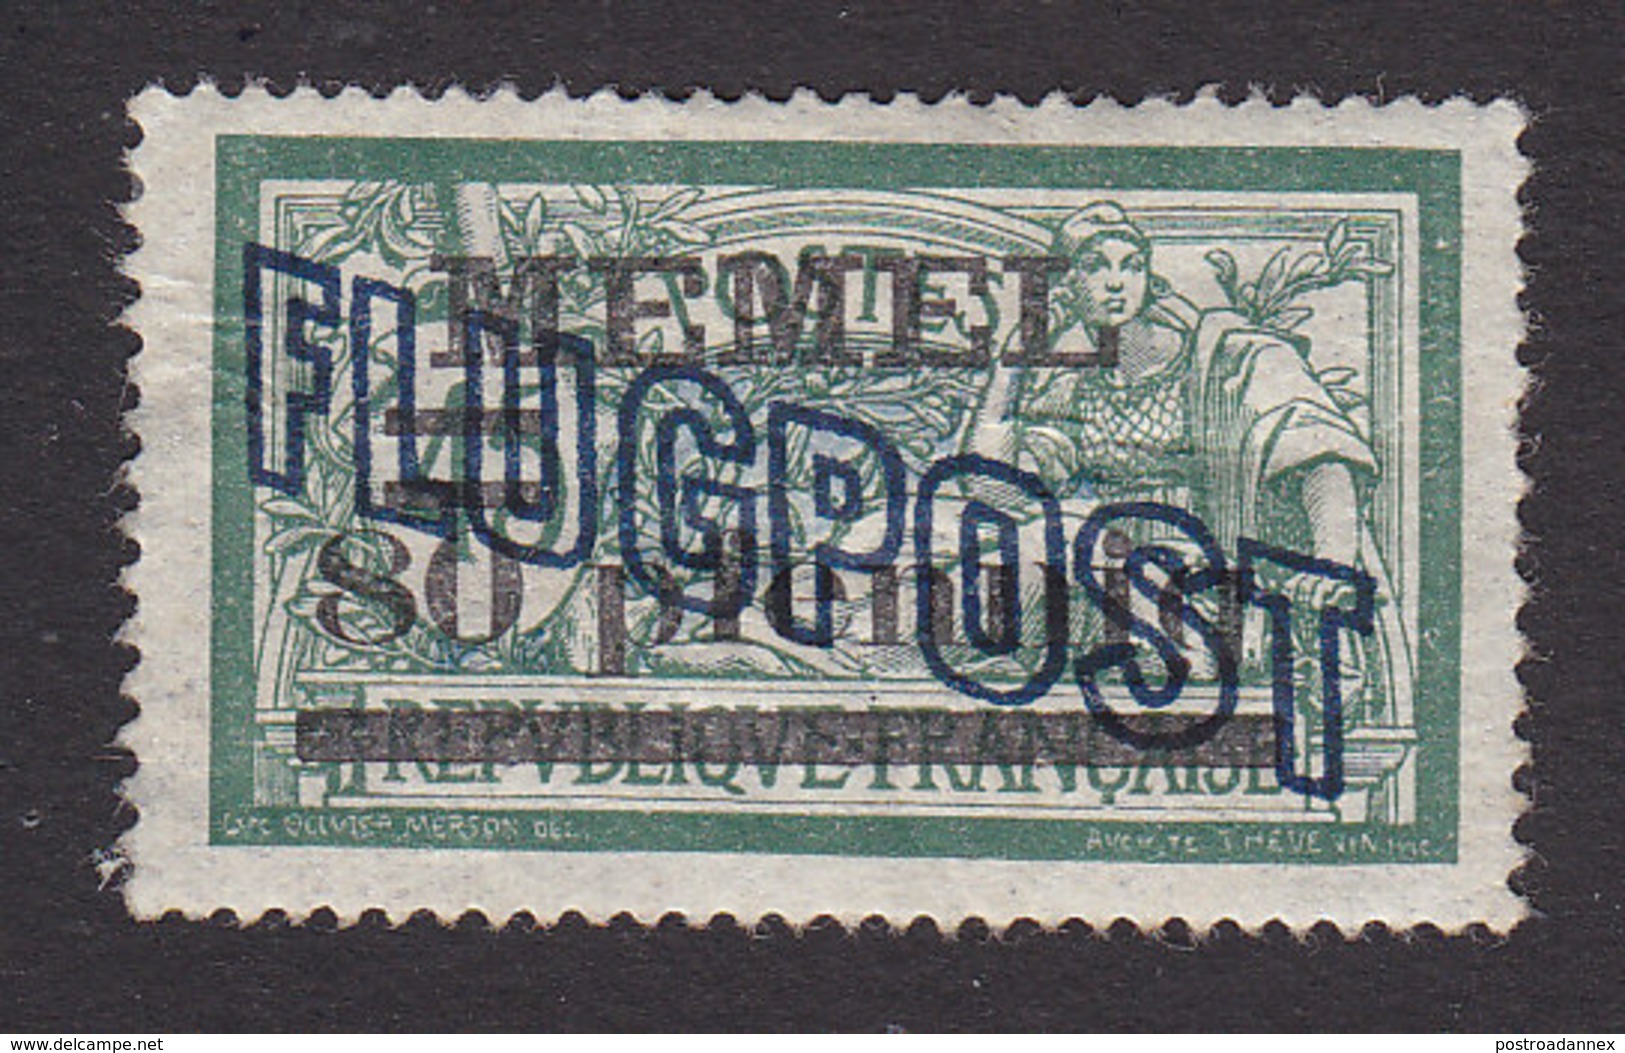 Memel, Scott #C2, Mint Hinged, French Stamp Surcharged, Issued 1921 - Unused Stamps